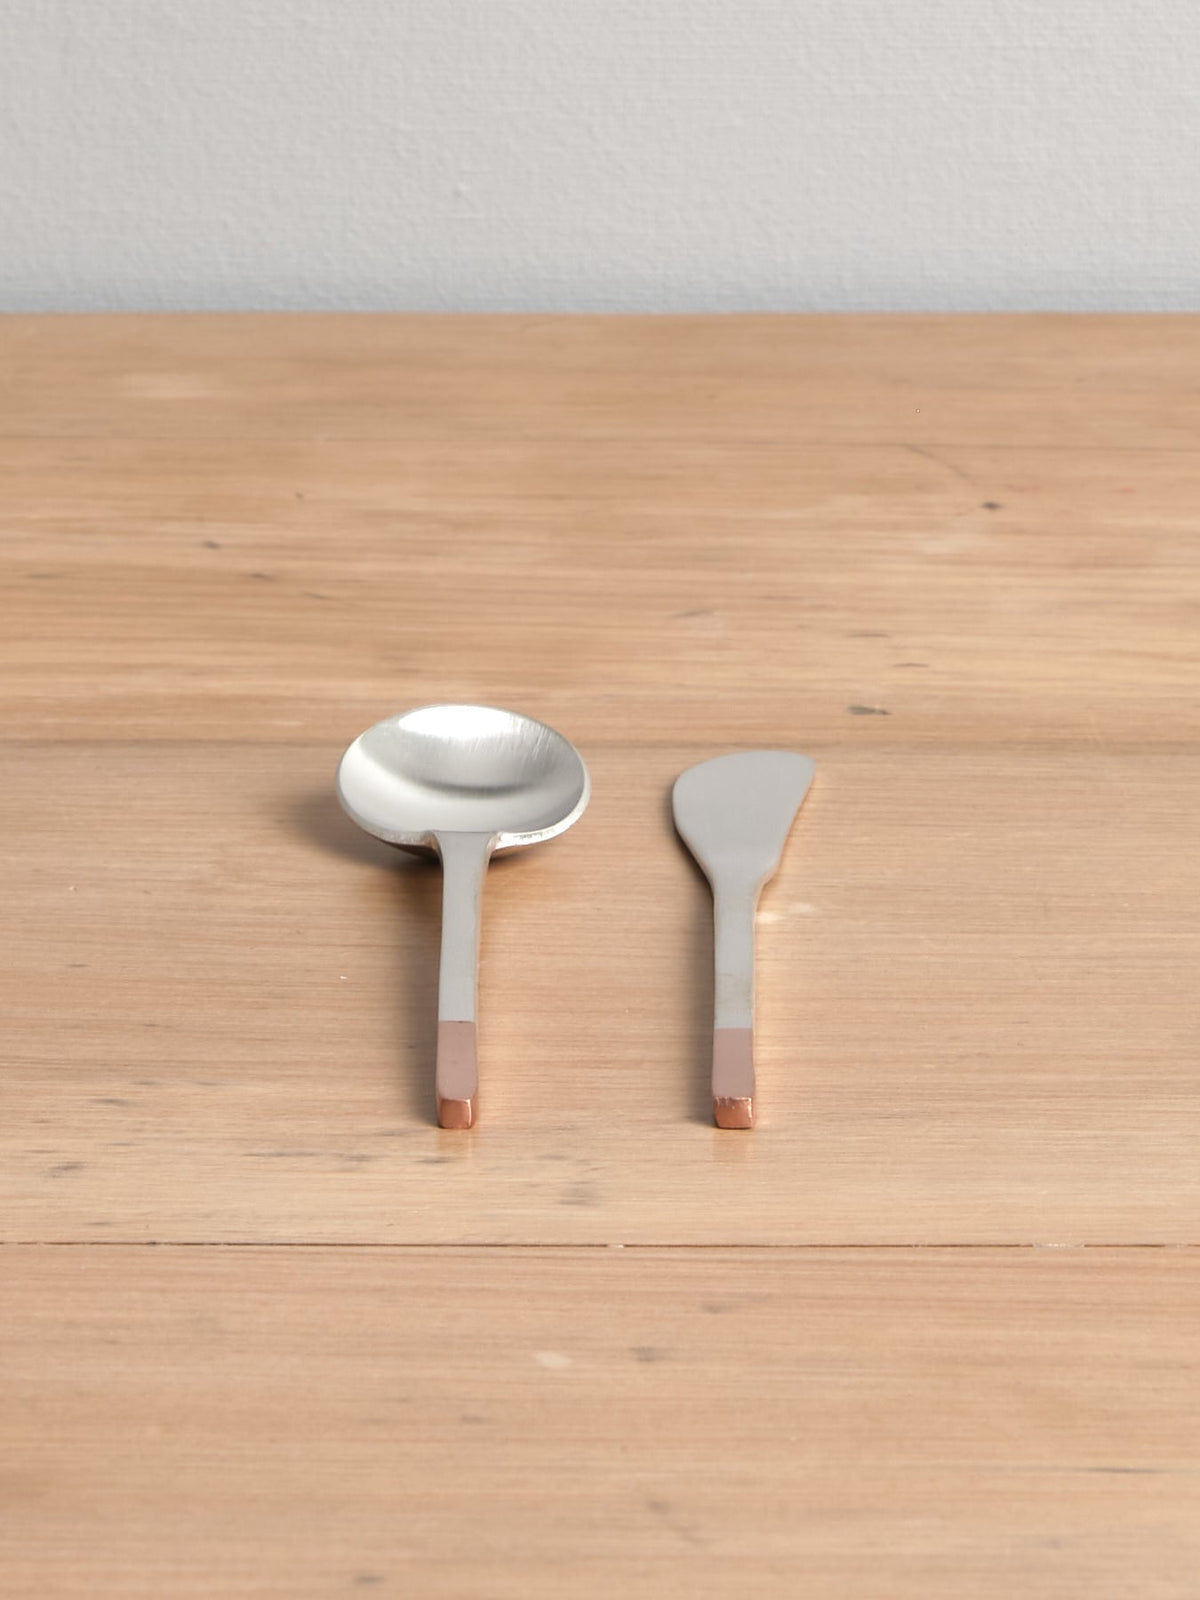 Two Copper and Stainless Steel Teaspoons on a wooden table. (Brand: Kobo Aizawa)